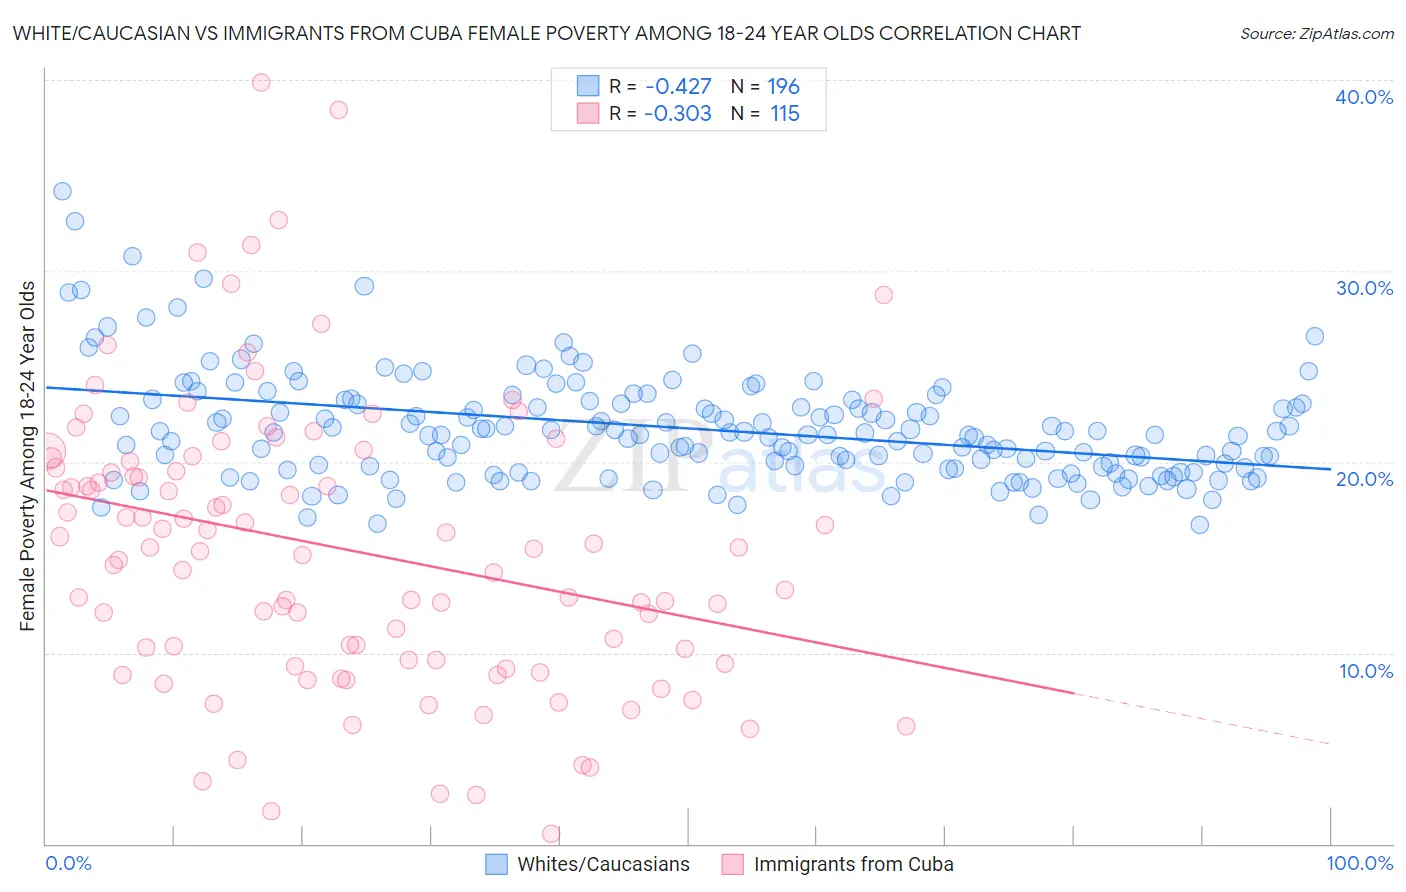 White/Caucasian vs Immigrants from Cuba Female Poverty Among 18-24 Year Olds